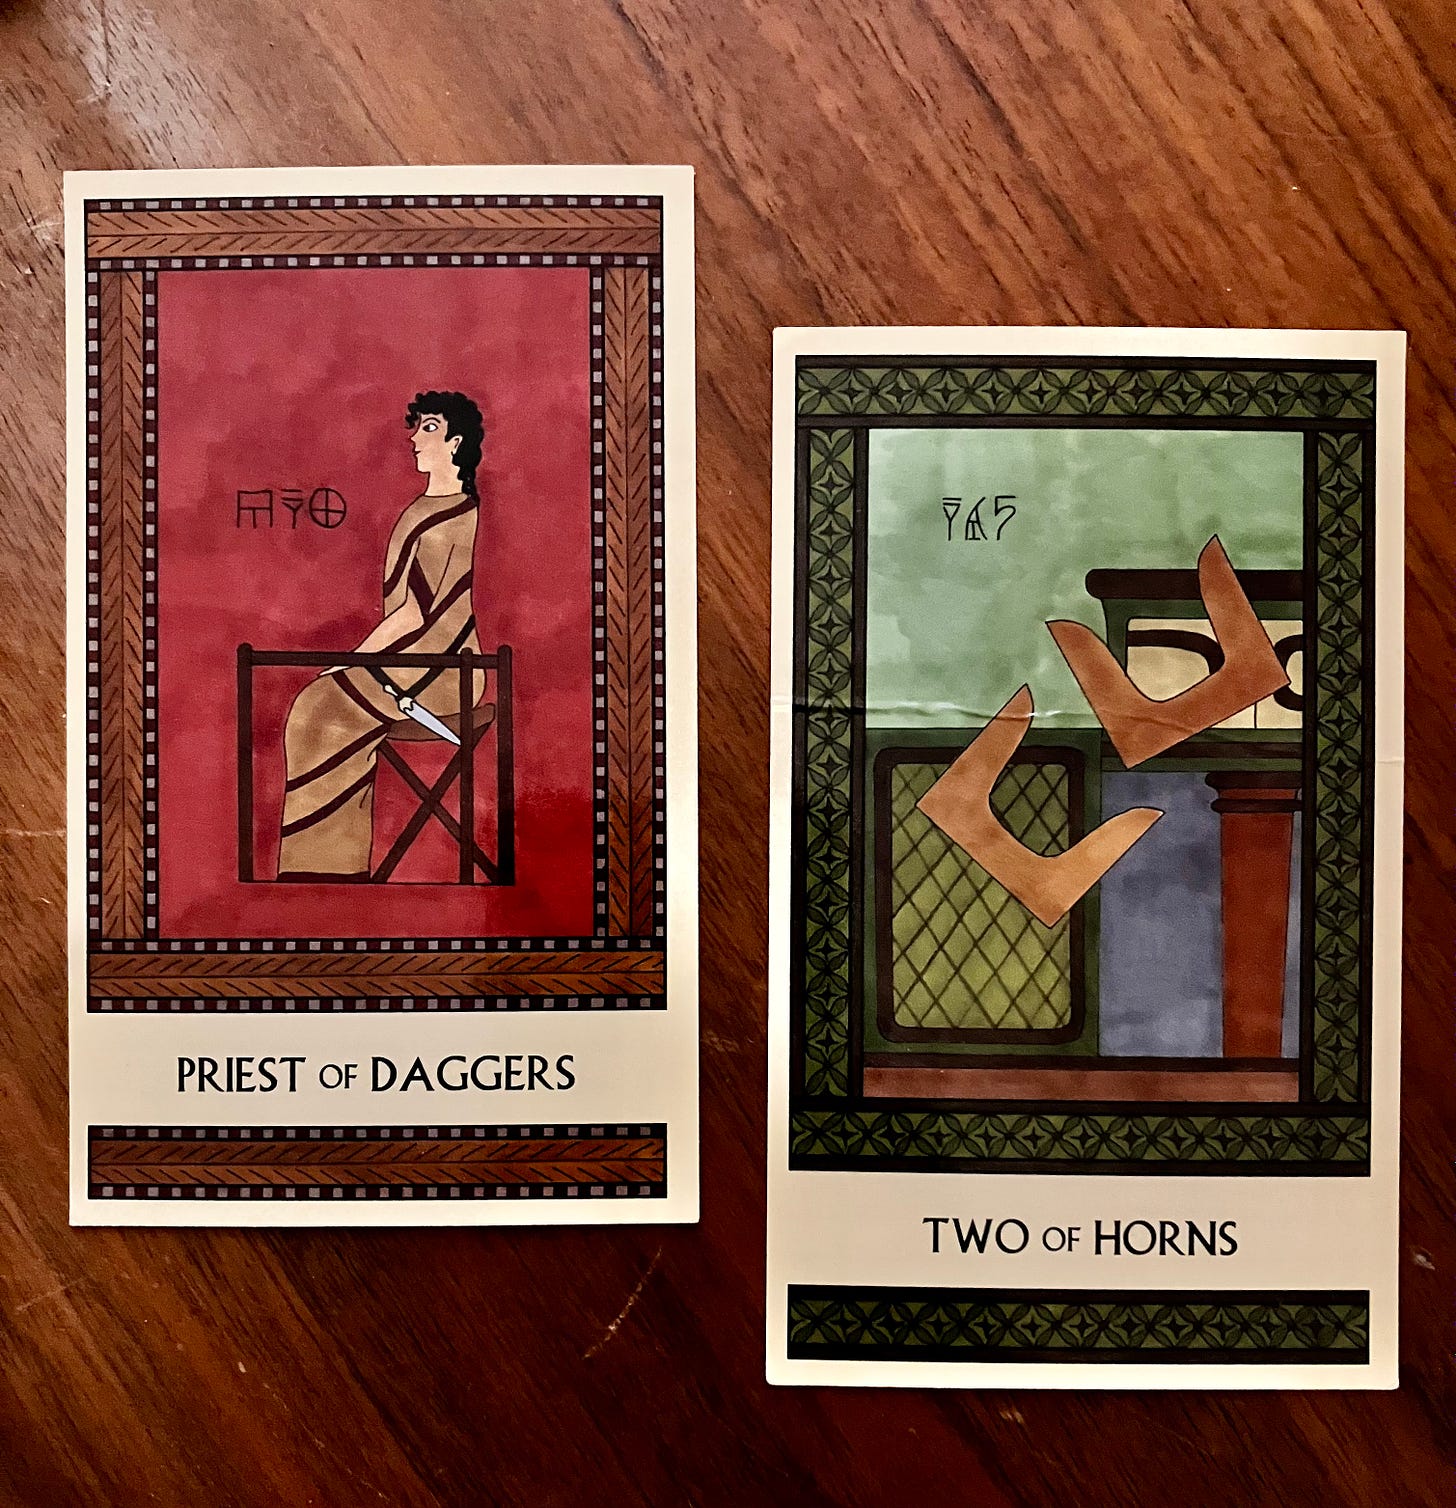 Two Minoan Tarot cards side by side on a brown wood surface. The Priest of Daggers is in shades of dark red and tan. It shows a Minoan man in a long robe, seated, facing left, with a dagger on his belt. The Two of Horns is in shades of green. It shows two pairs of sacred horns tumbling off a shrine.